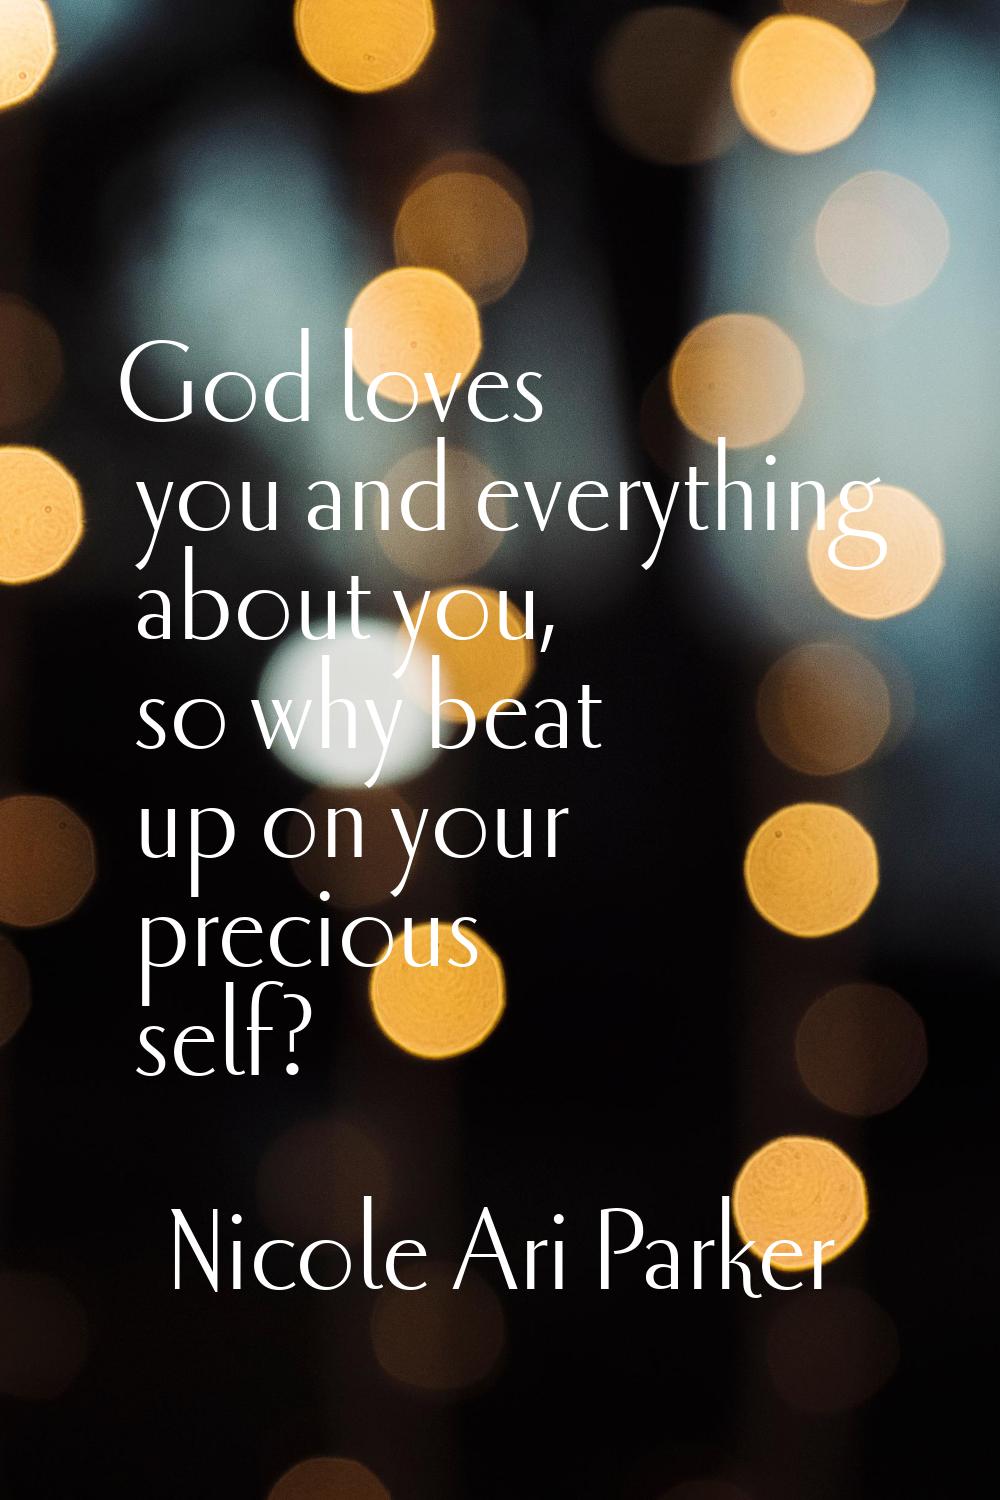 God loves you and everything about you, so why beat up on your precious self?